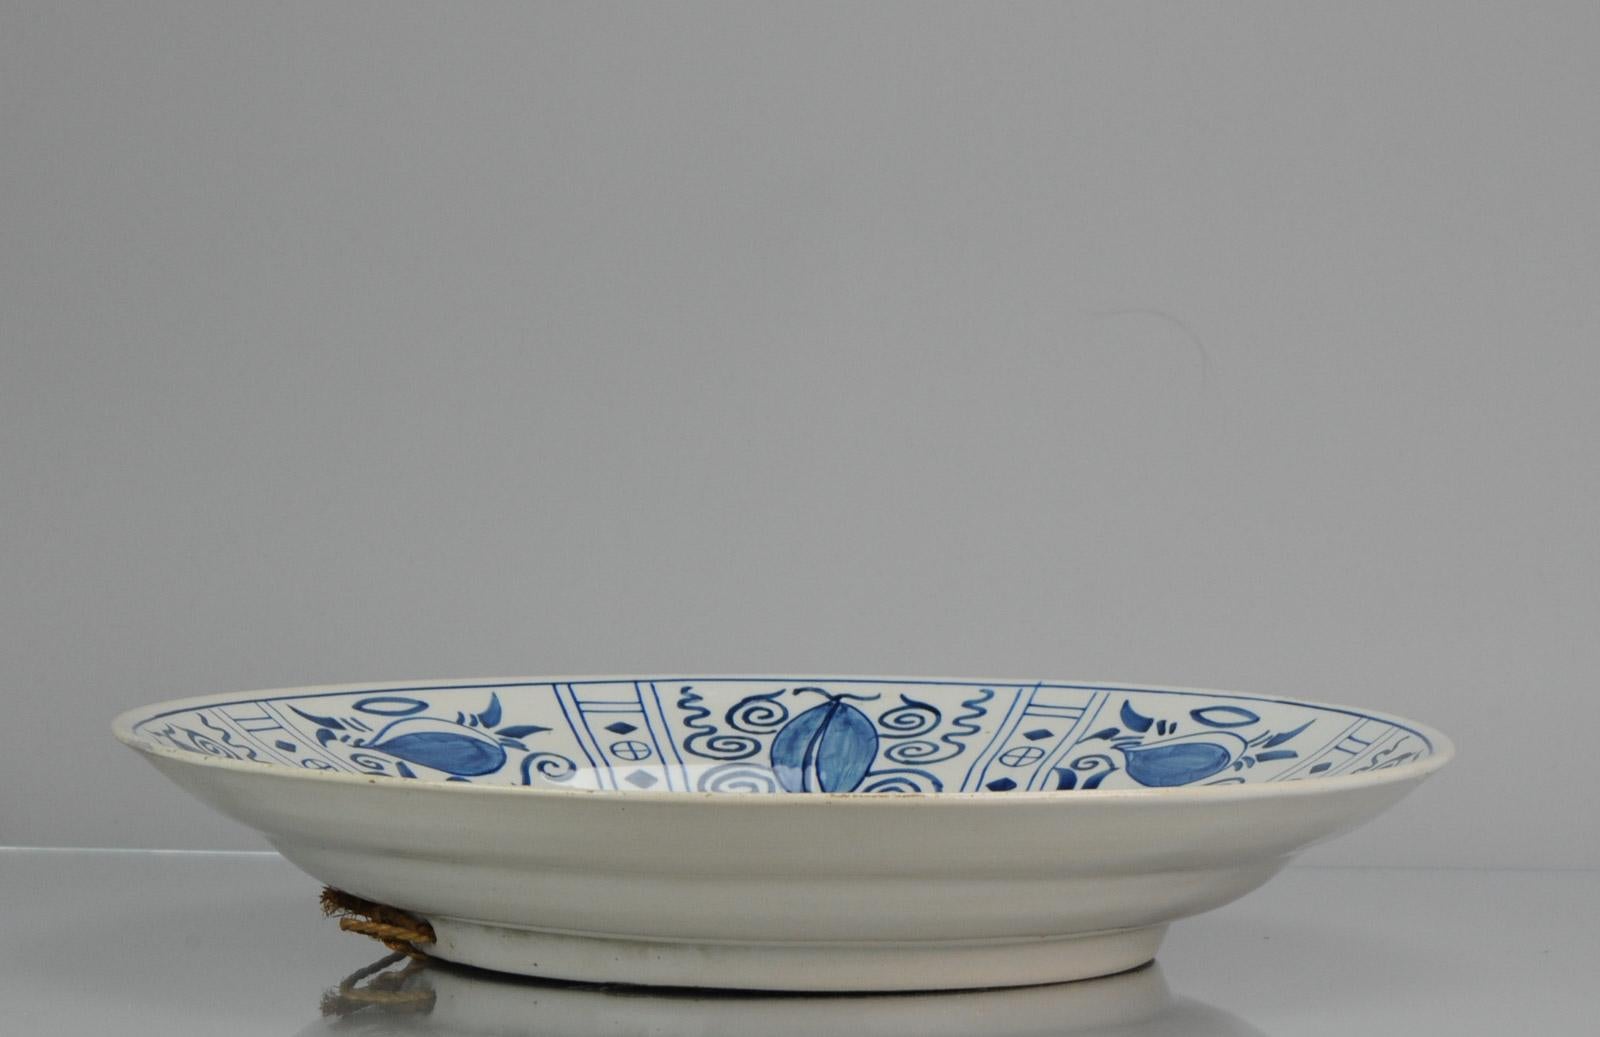 Lovely and large Dutch Delftware remake of a wanli kraak charger. Beautiful collectors piece.

Additional information:
Material: Porcelain & Pottery
Region of Origin: Europe
Period: ca 1900 
Condition: Overall Condition Filled chips and some small